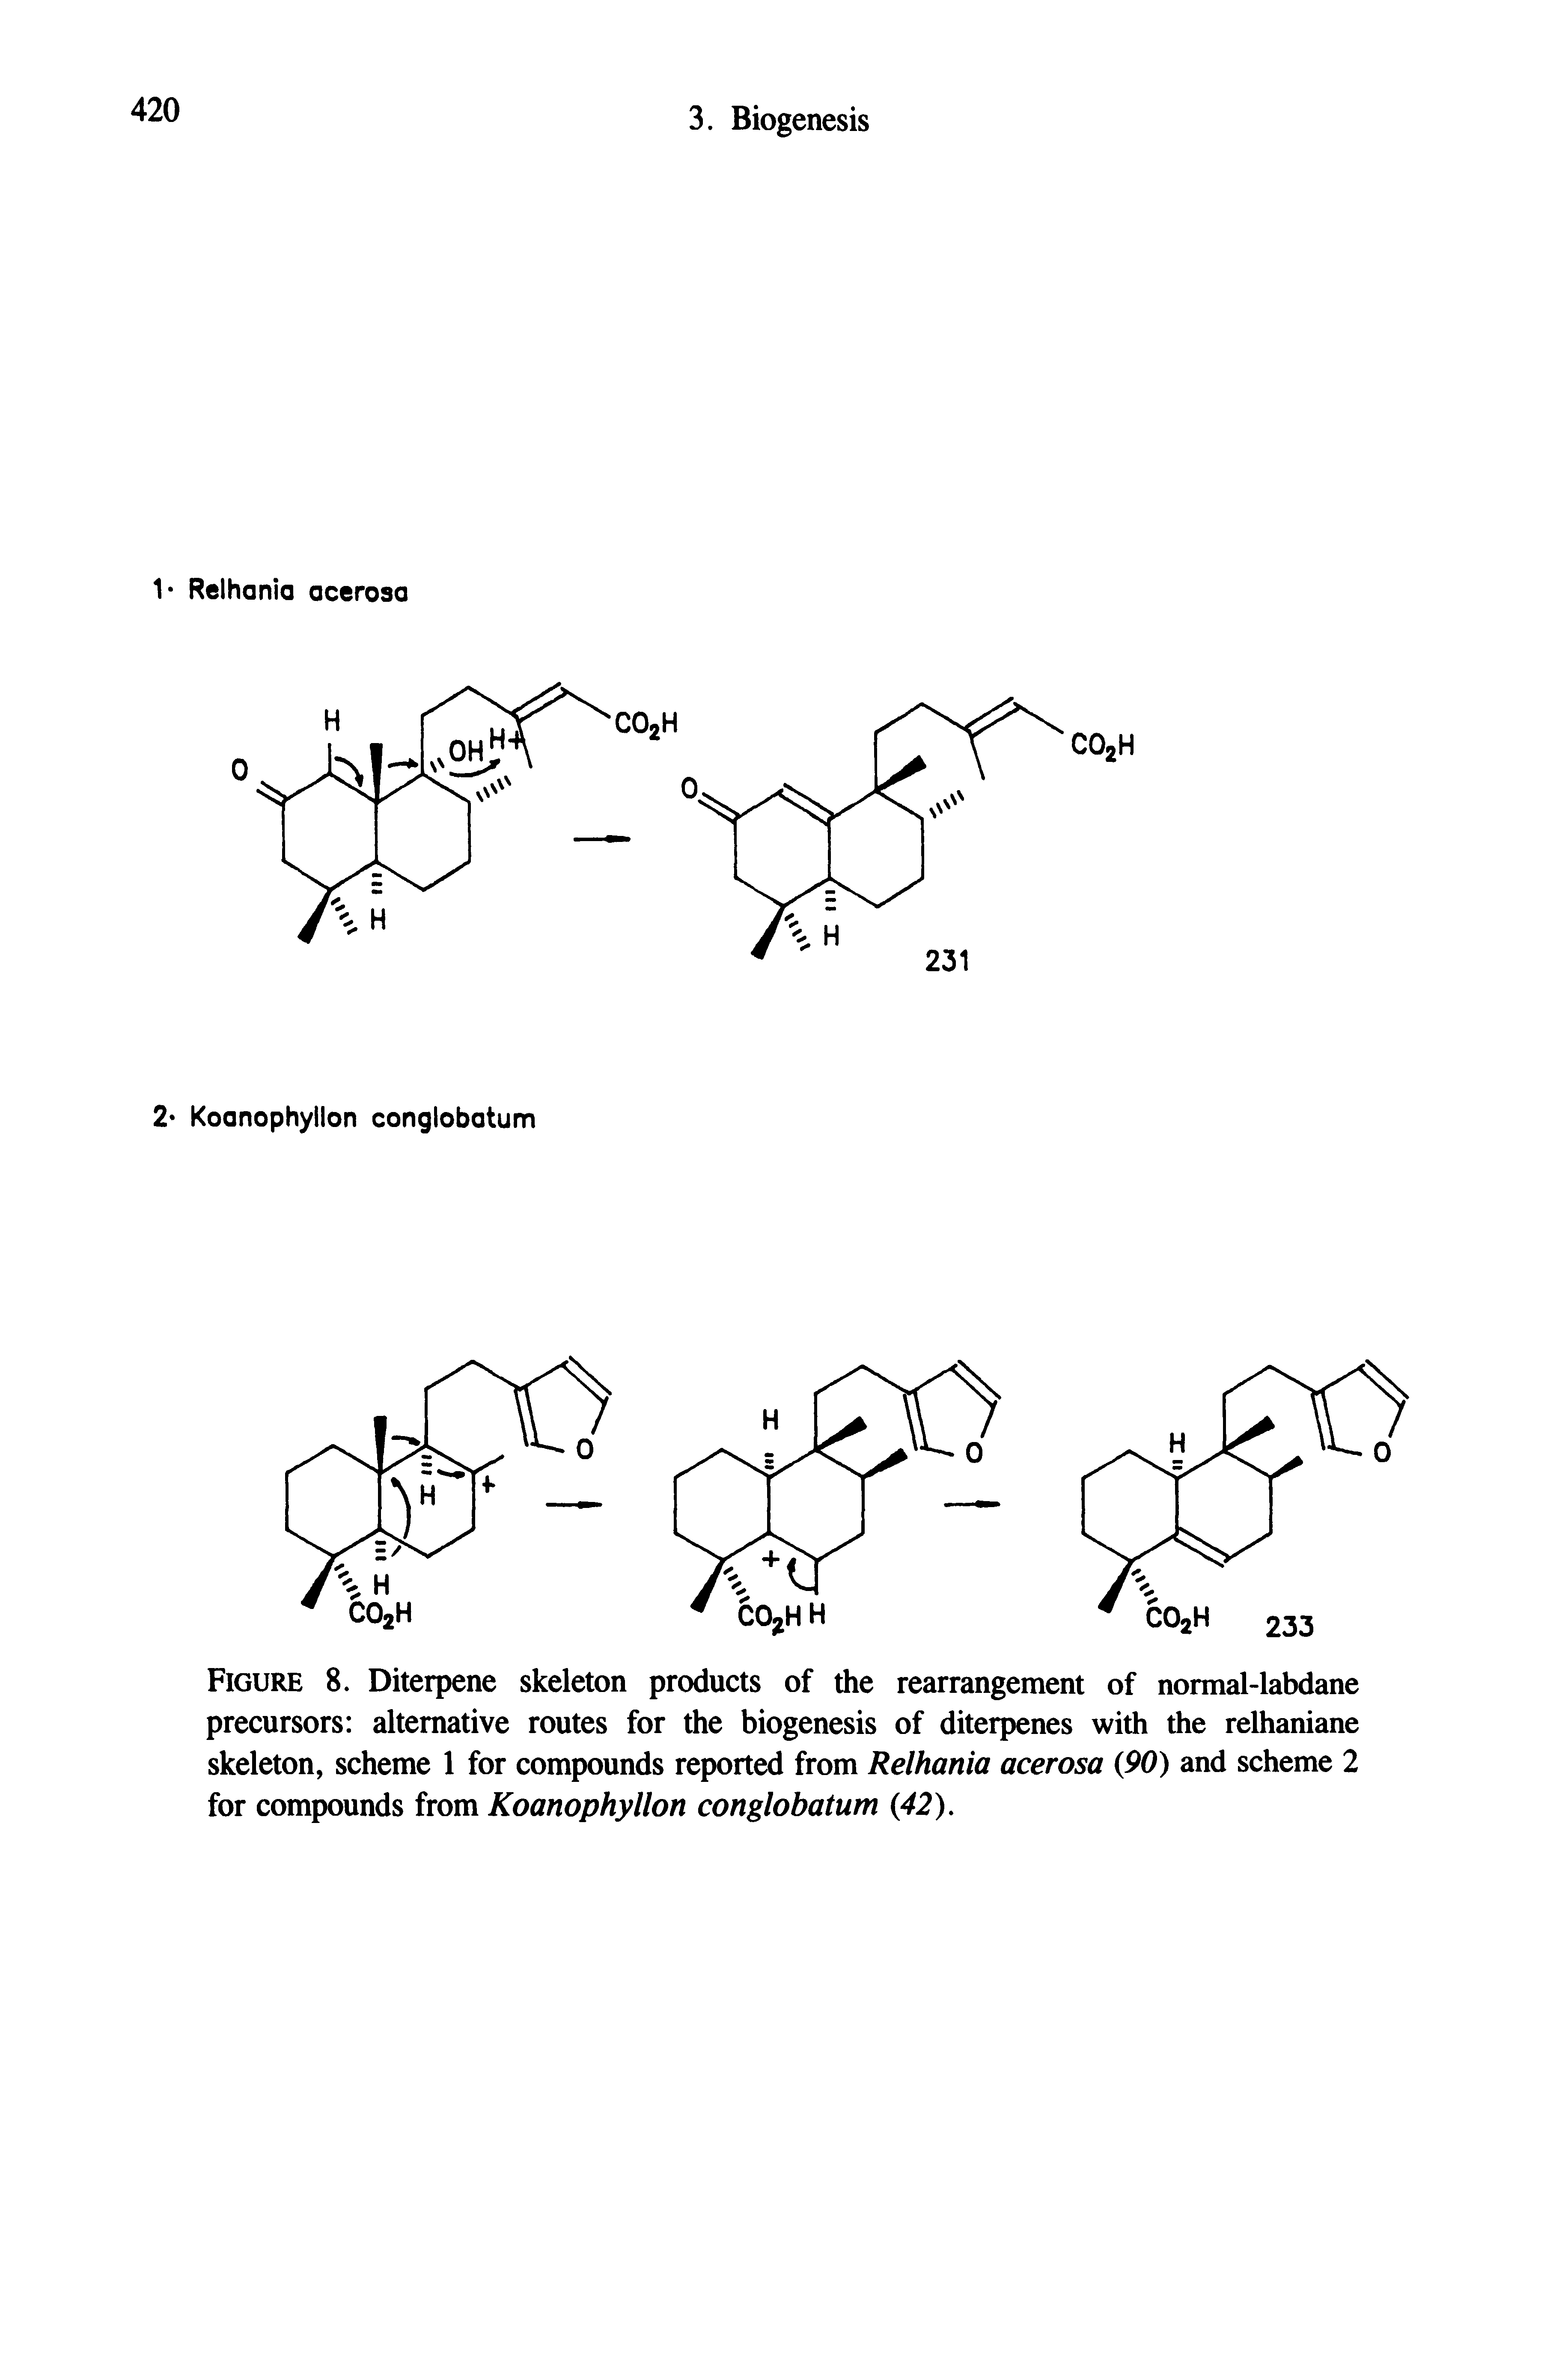 Figure 8. Diterpene skeleton products of the rearrangement of normal-labdane precursors alternative routes for the biogenesis of diterpenes with the relhaniane skeleton, scheme 1 for compounds reported from Relhania acerosa 90) and scheme 2 for compounds from Koanophyllon conglobatum 42),...